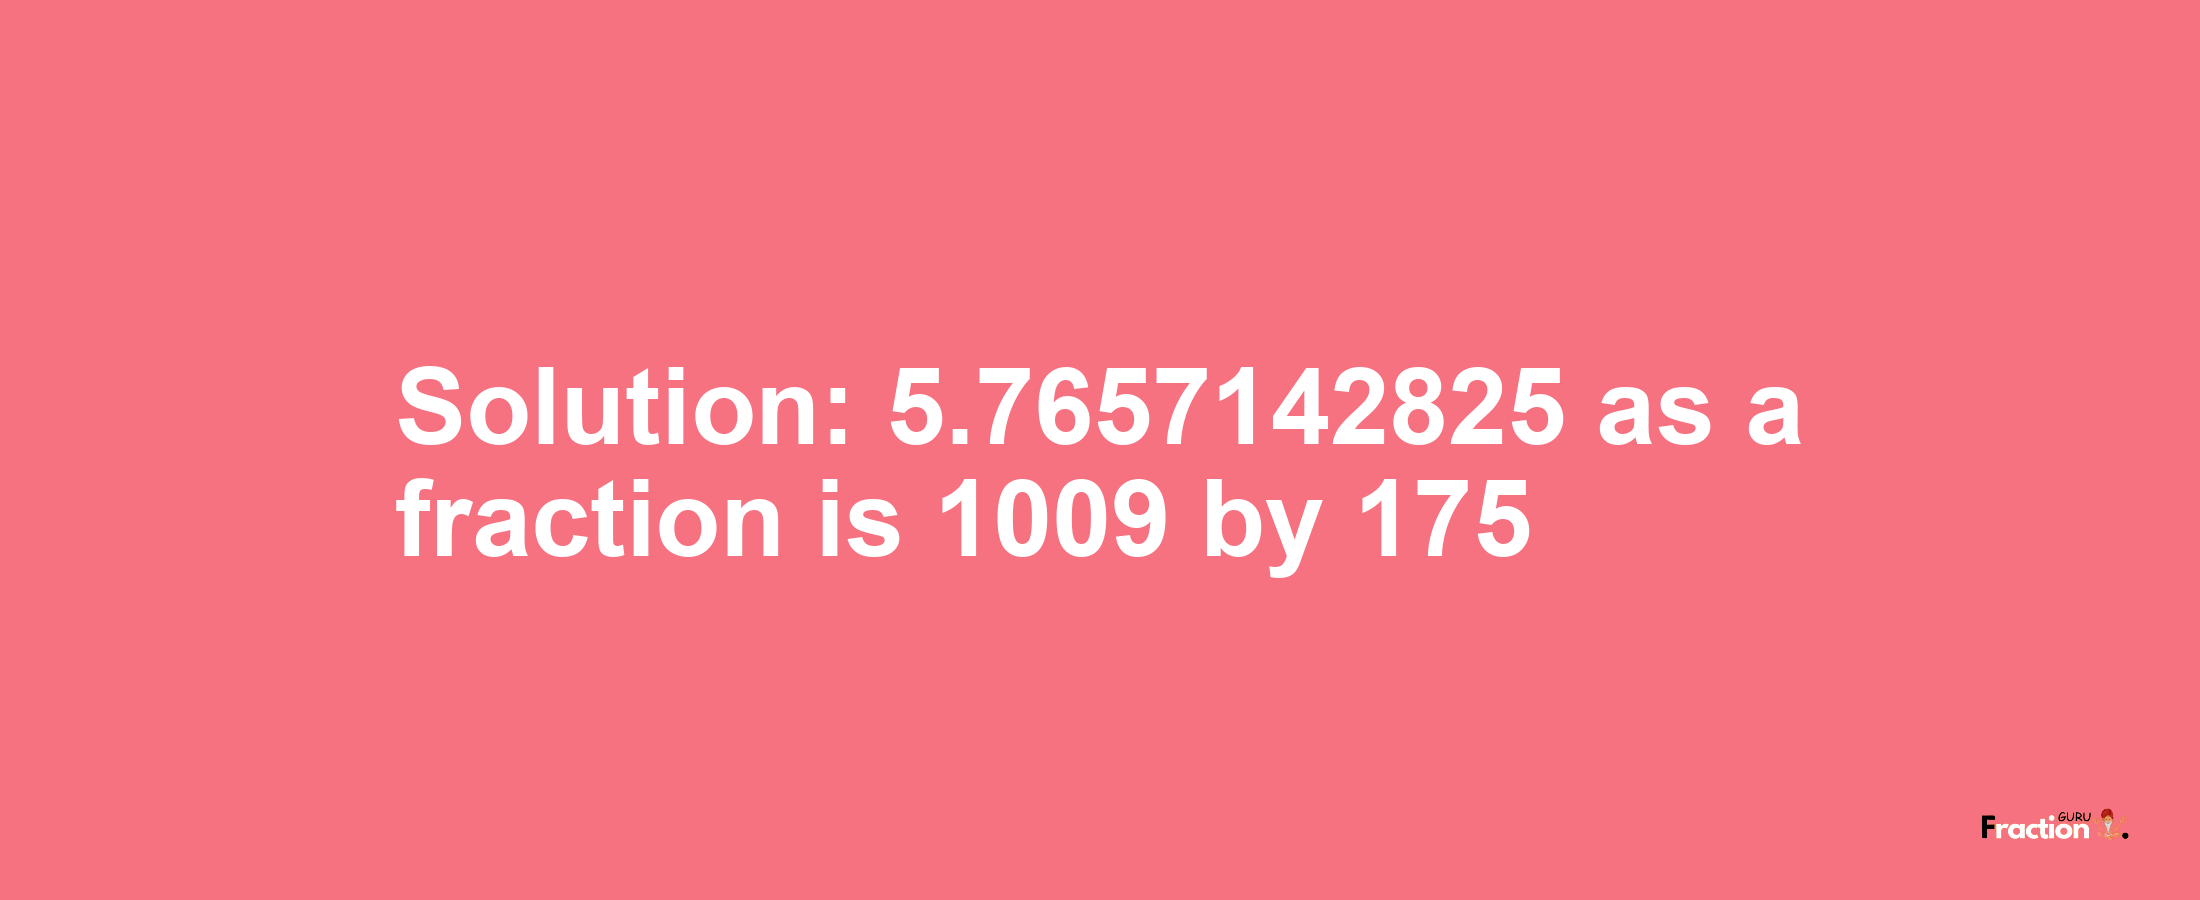 Solution:5.7657142825 as a fraction is 1009/175